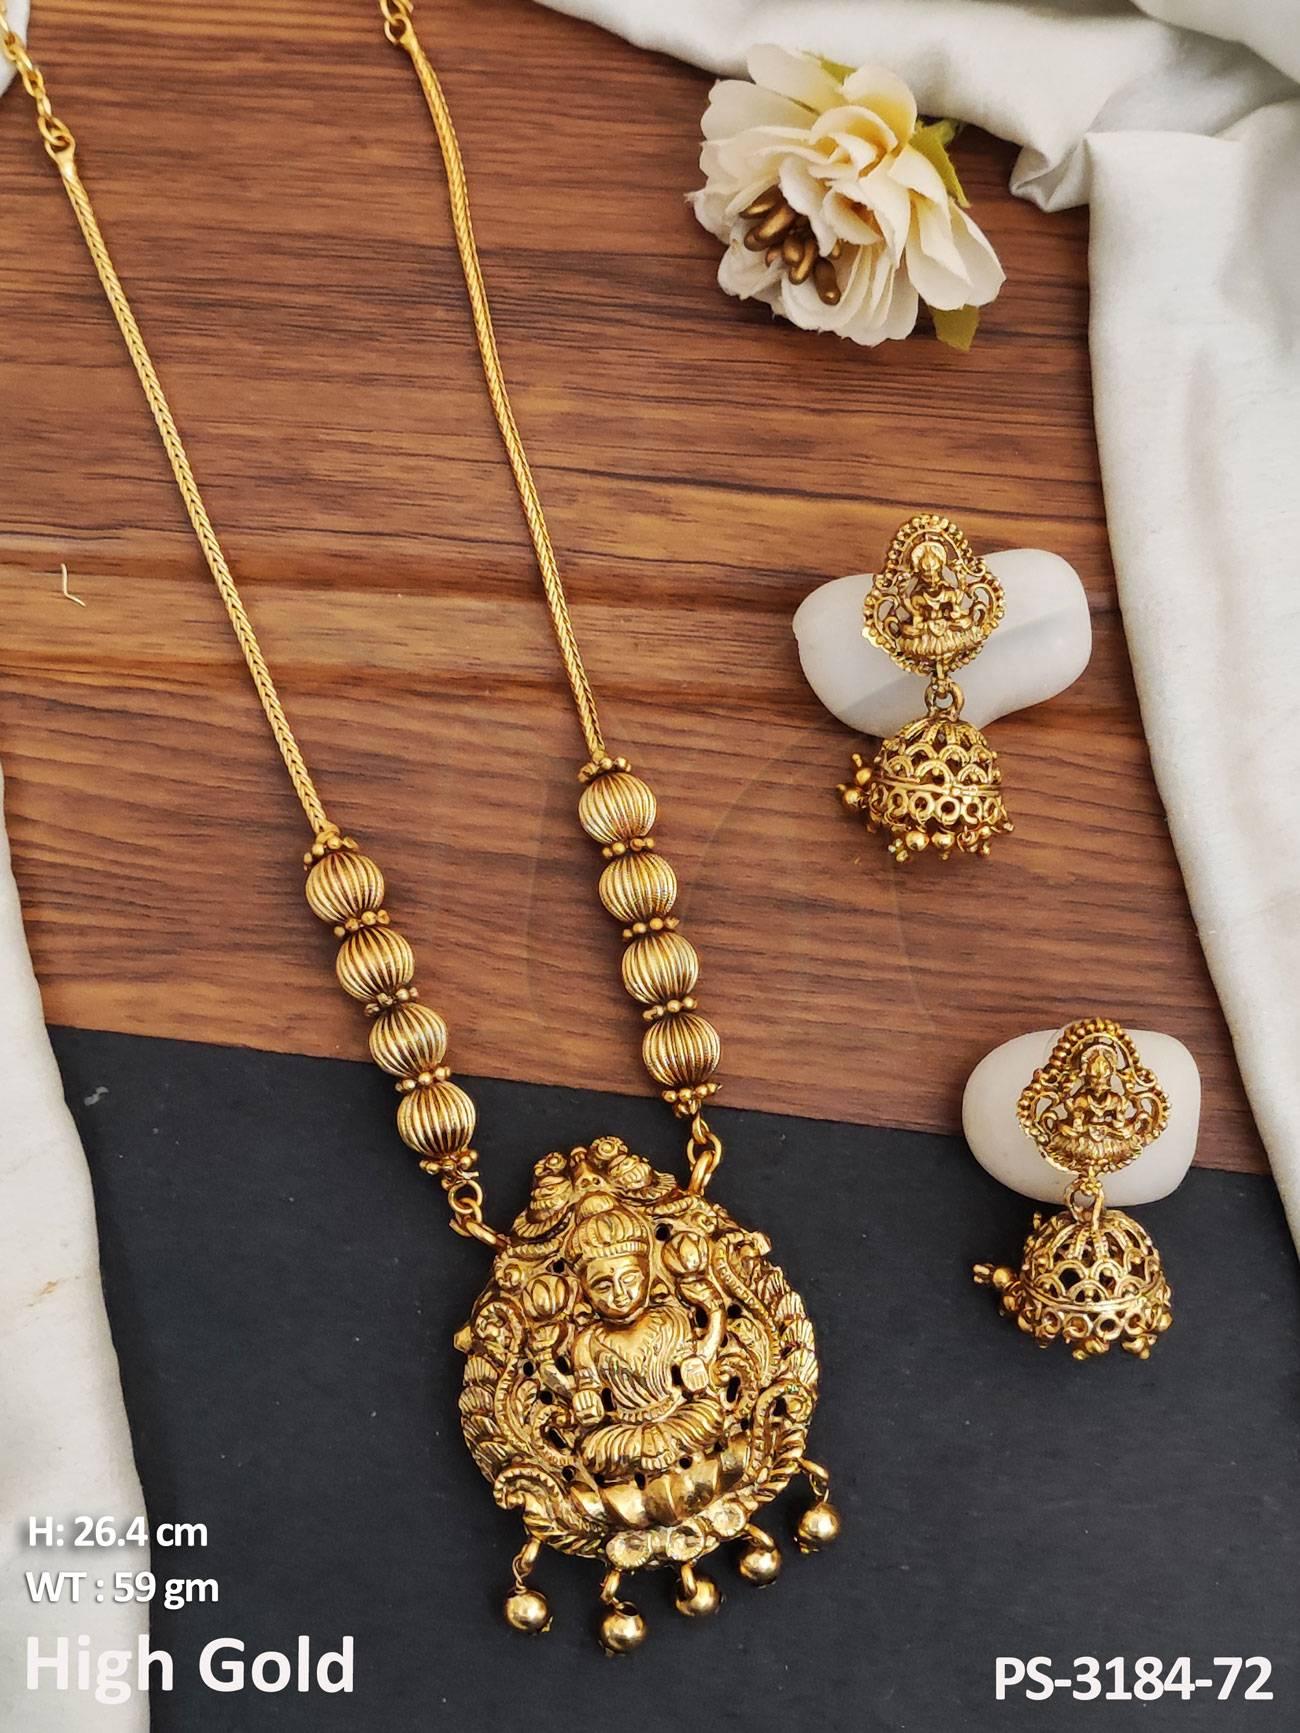 The pendant has an intricate design with a long temple jewellery pattern. Its delicate craftsmanship makes it an eye-catching piece that will stand out.